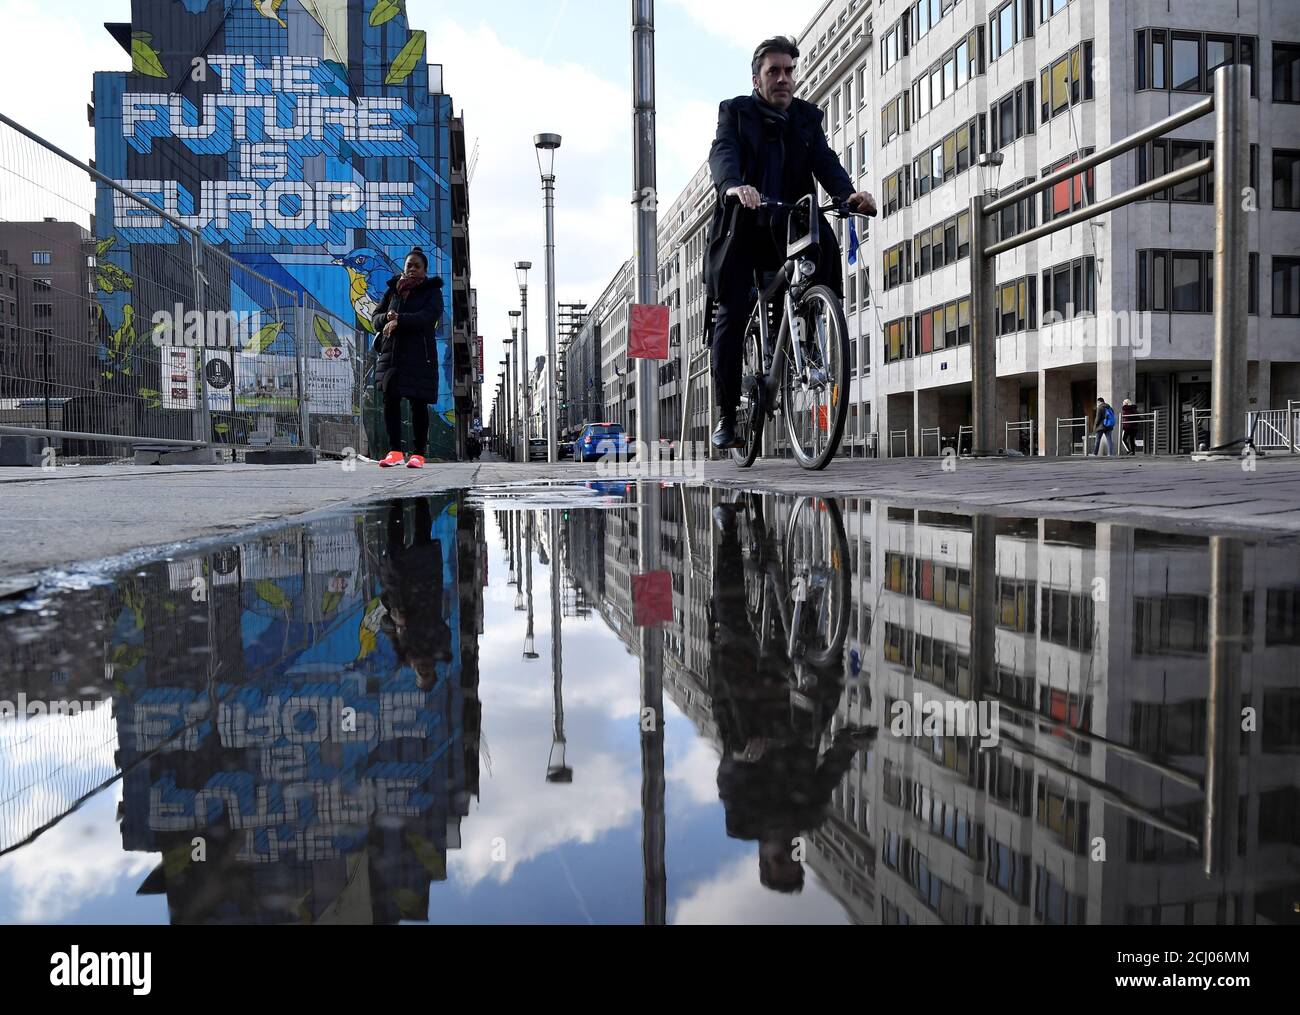 People are reflected in a puddle as they pass by a mural near the EU headquarters in Brussels, Belgium March 20, 2019. REUTERS/Toby Melville Stock Photo